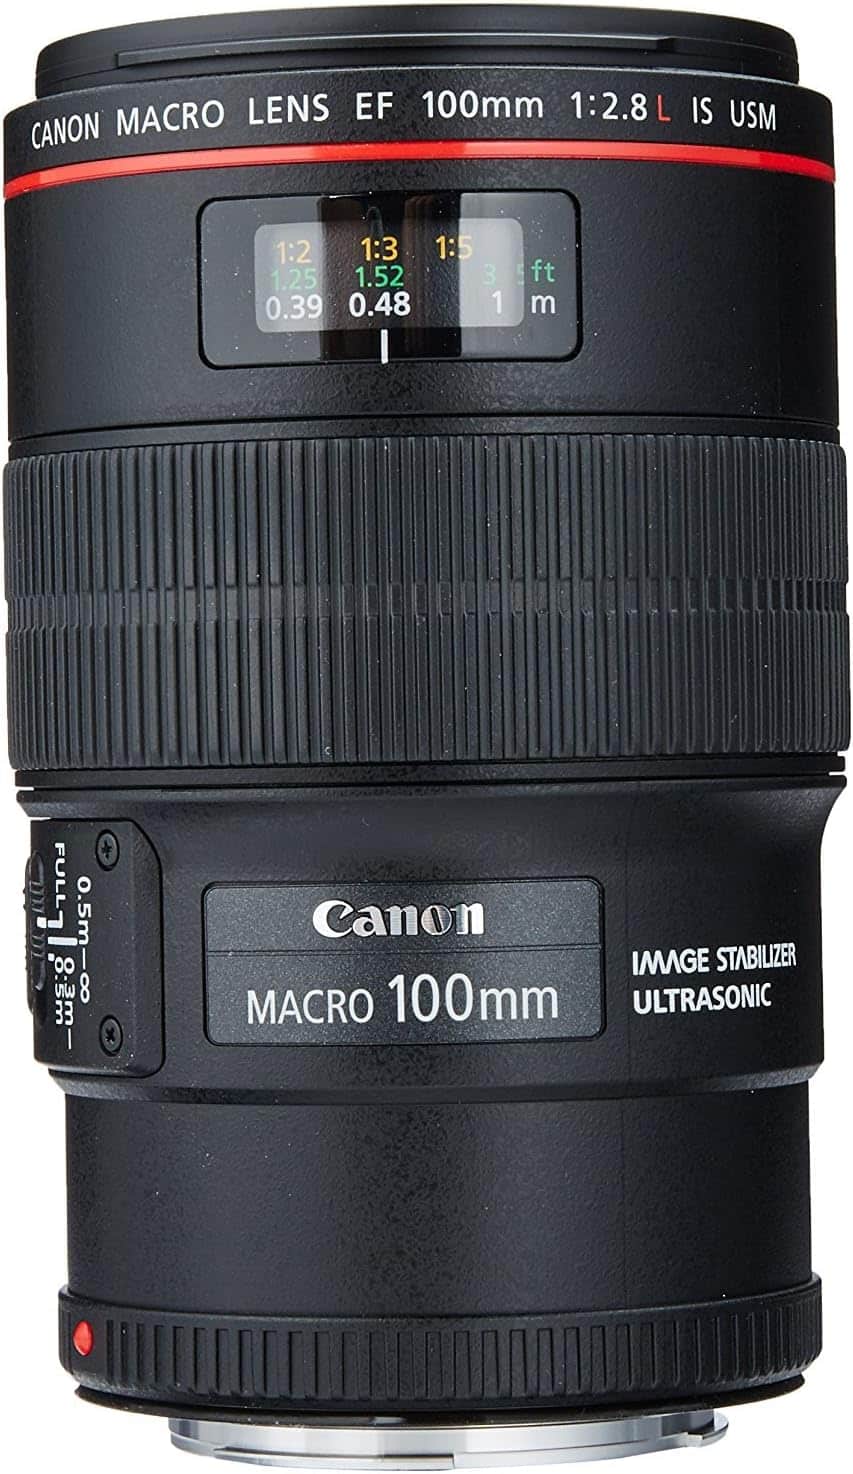 Unrivaled Performance: Canon EF 100mm f/2.8L IS USM Macro Lens Review